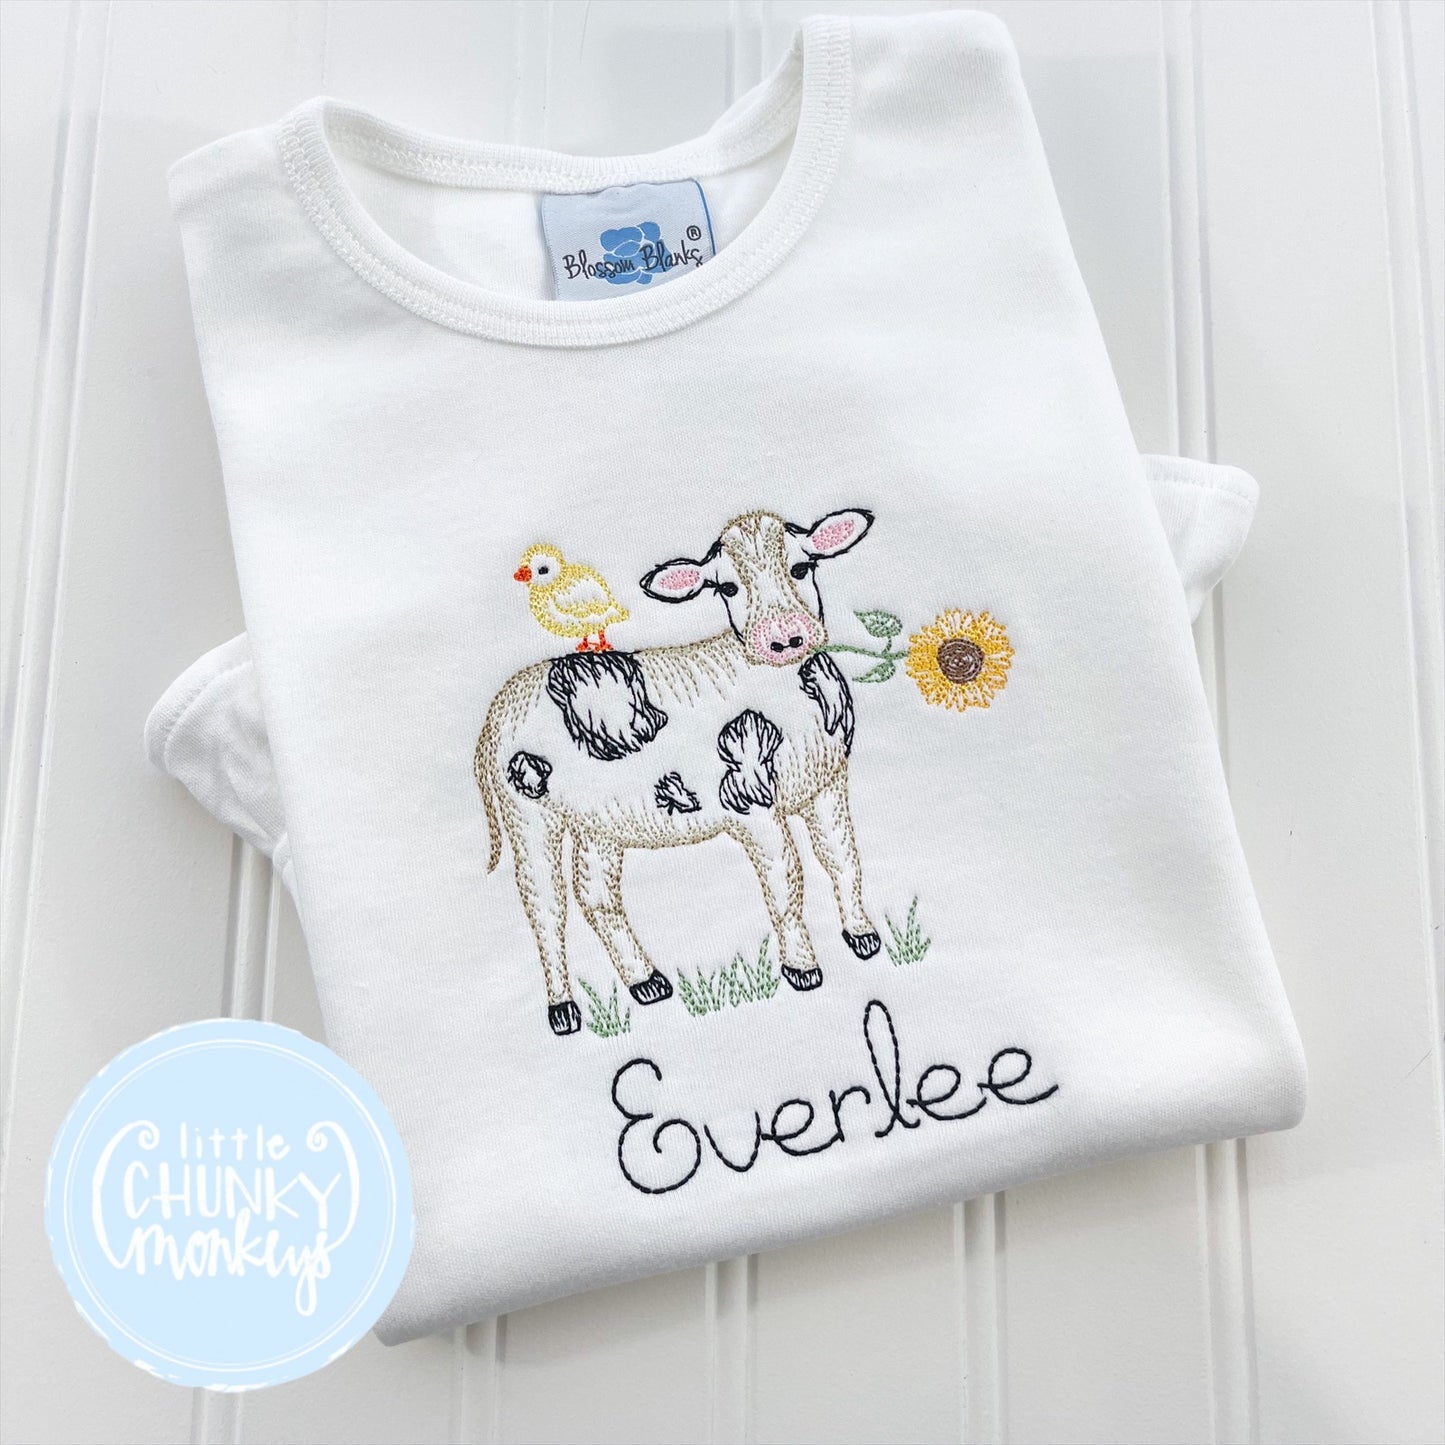 Girl Shirt- Stitched Cow